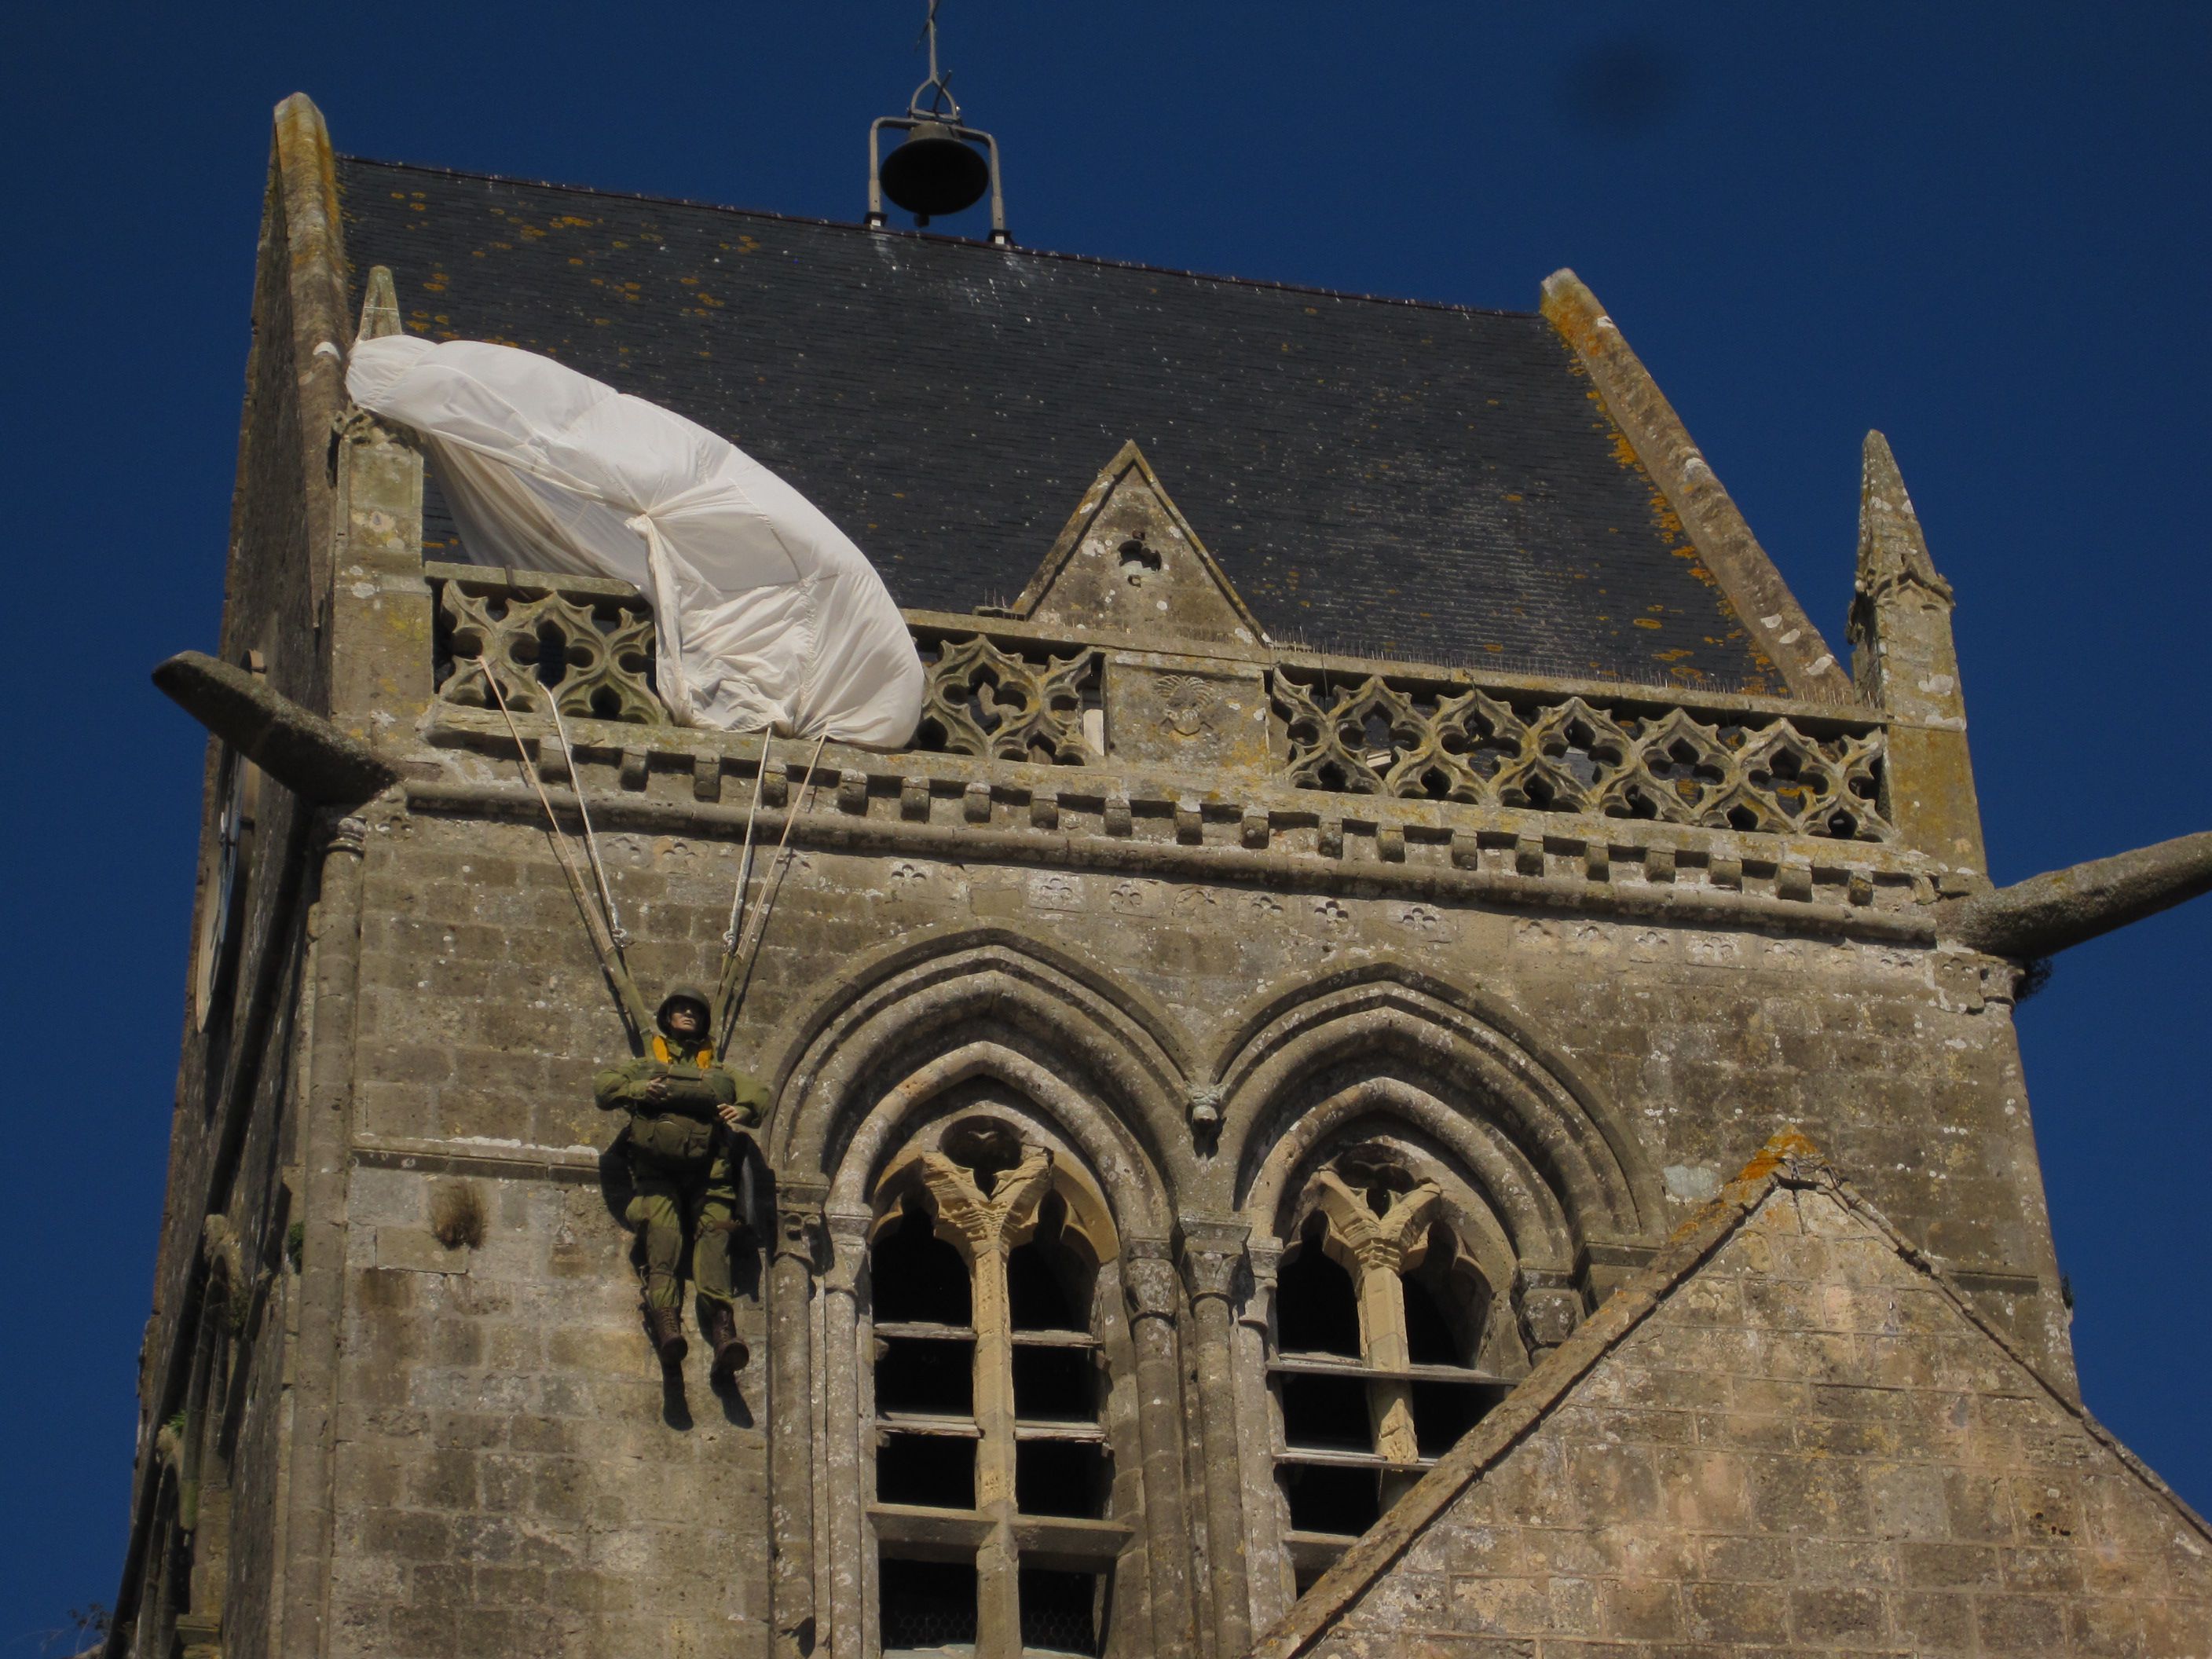 Another form of the public representation of history is the paratrooper effigy on the steeple of the church of Sainte-Mère-Église in Normandy, France. It commemorates an American soldier who accidentally got caught on the church spire during the D-Day invasion of 1944. This playful monument shows a relatively casual approach to history, the effigy seeming almost like an advertisement for the Airborne Museum located across from the church. Photo: Irmgard Zündorf, Sainte-Mère-Église 2015, License [https://creativecommons.org/licenses/by-nc/3.0/de/ CC BY-NC 3.0 DE]